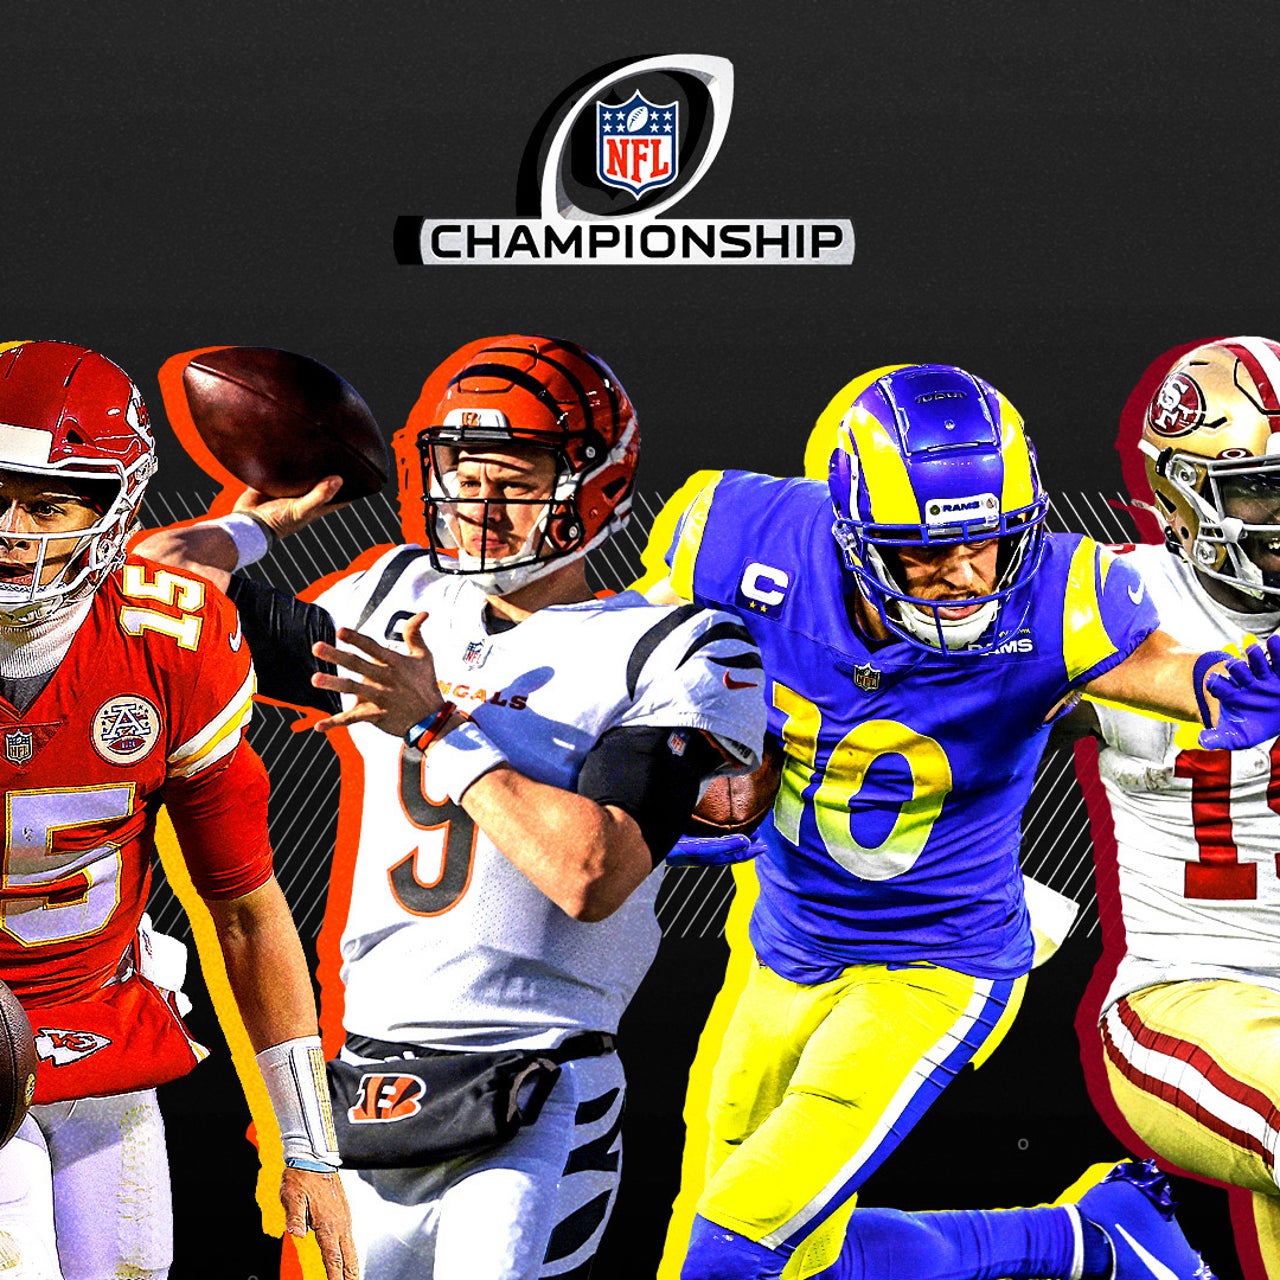 NFL scores and recaps for the AFC, NFC championship games